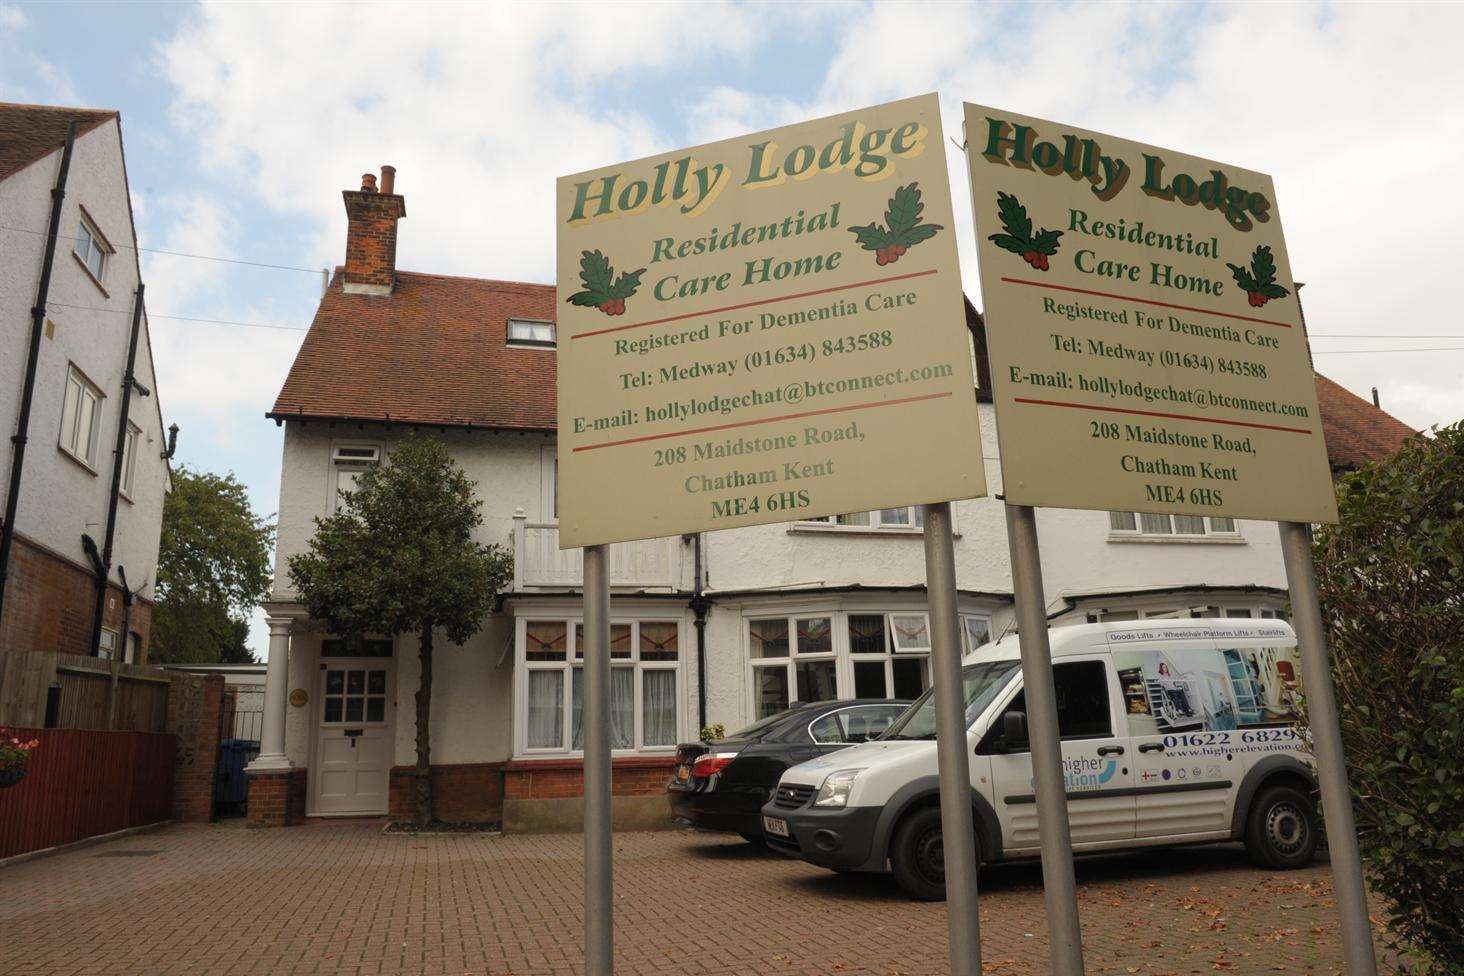 Holly Lodge residential home,Maidstone Road, Chatham.